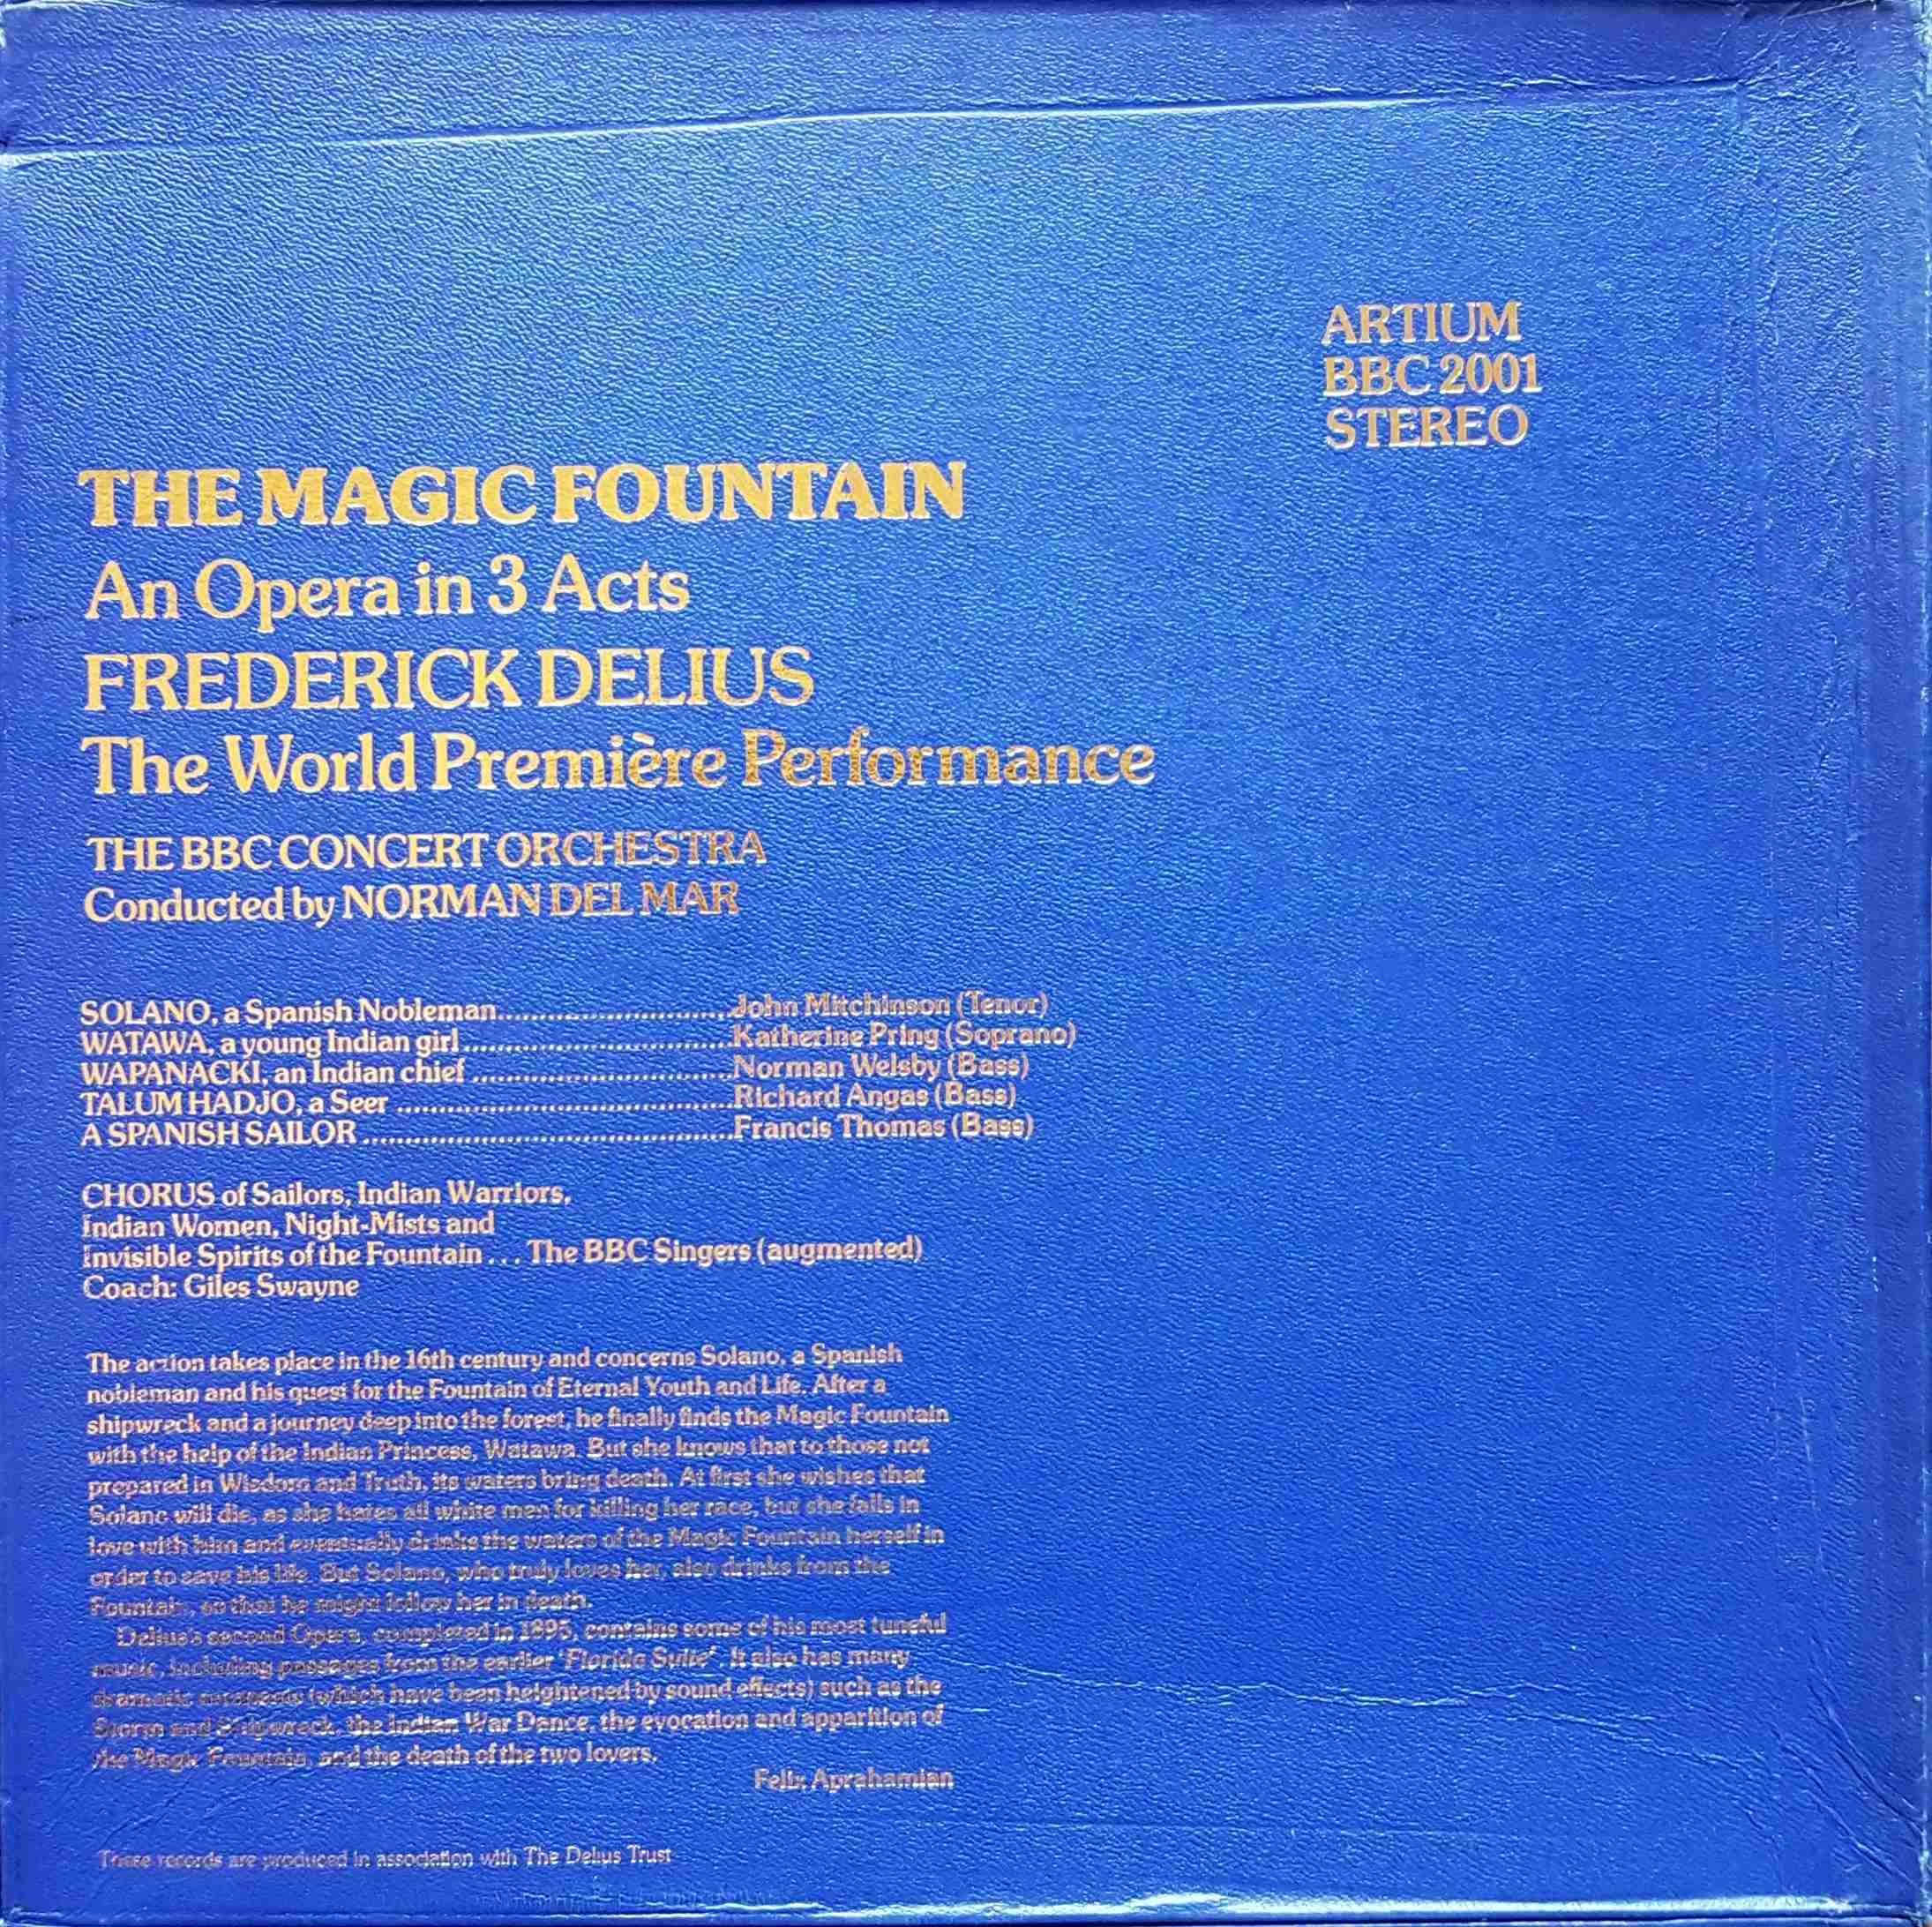 Picture of BBC 2001 The magic fountain by artist Frederick Delius from the BBC records and Tapes library